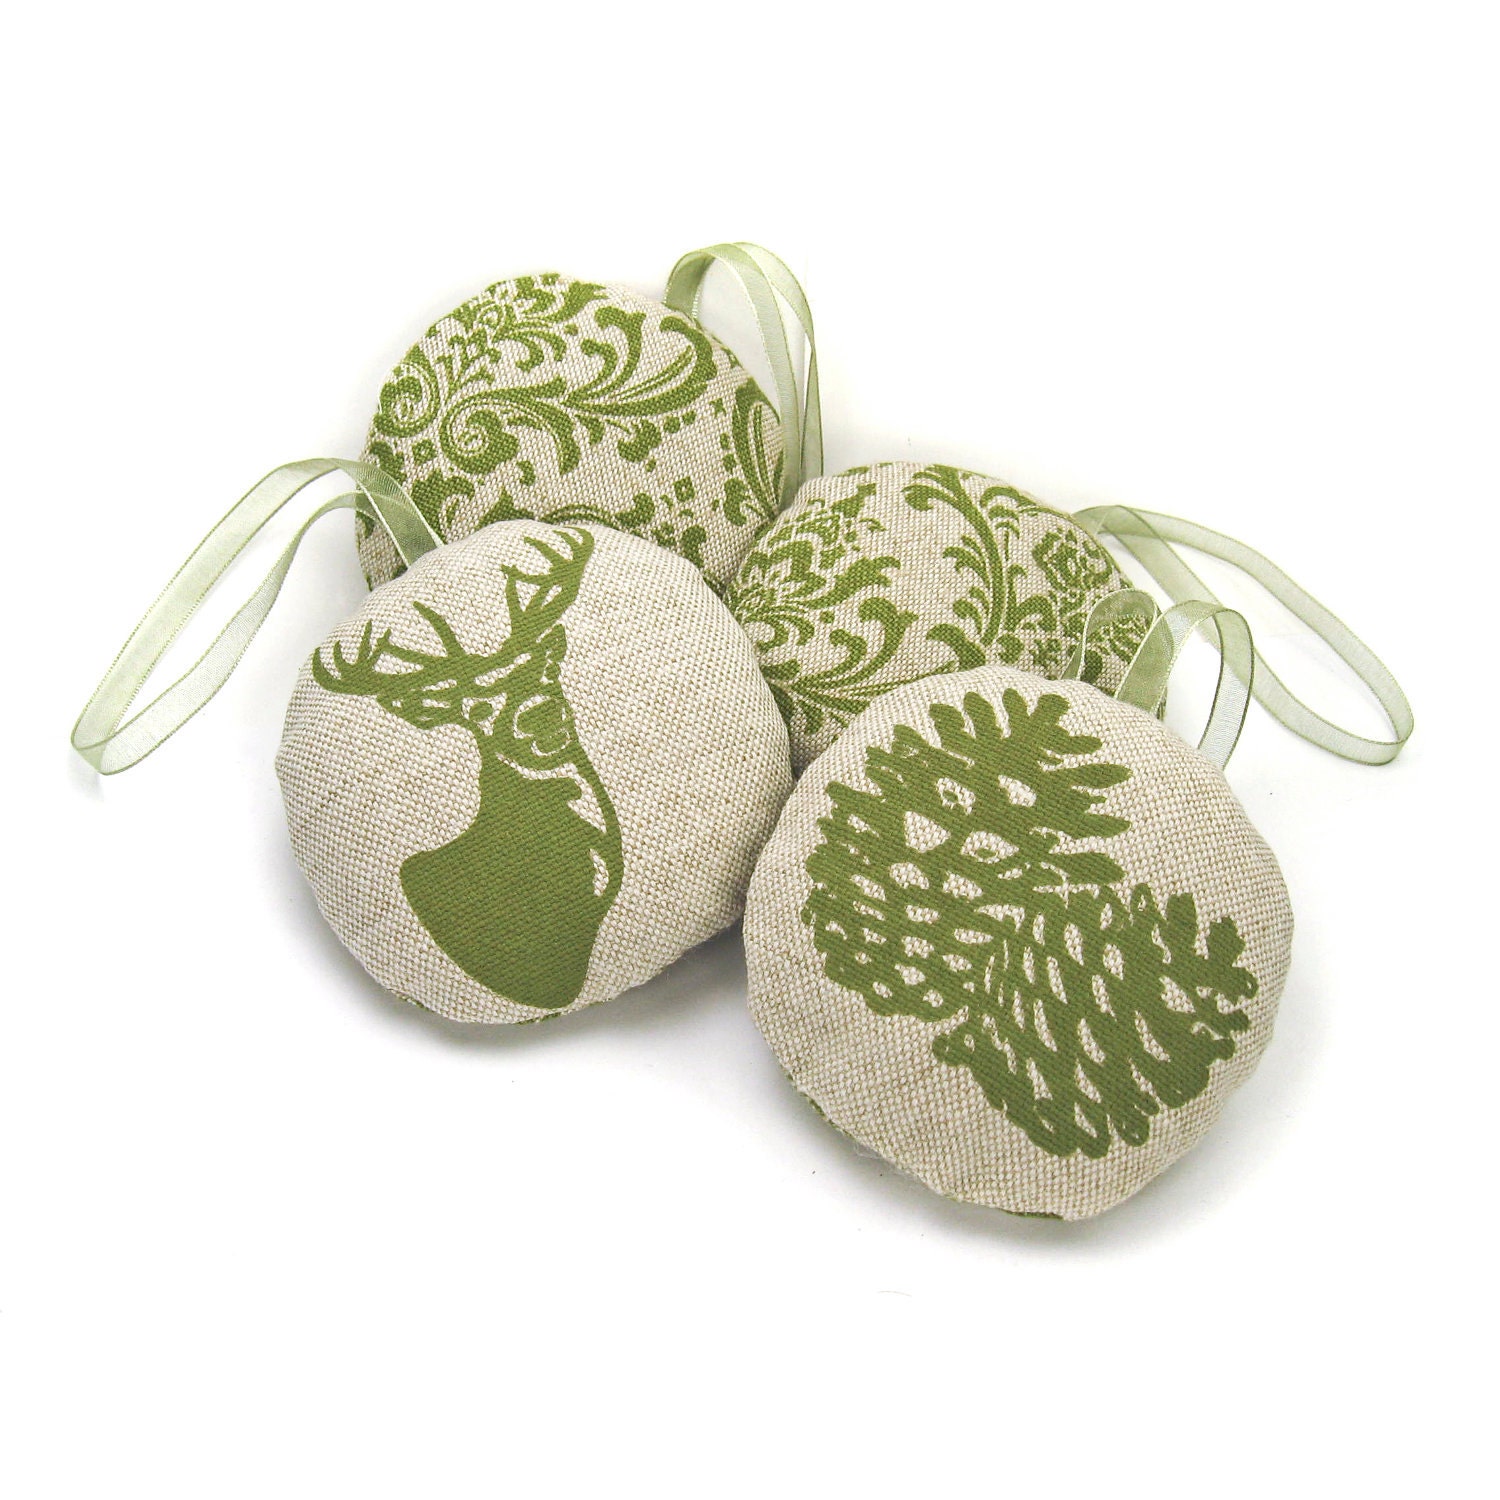 Christmas tree ornaments, Shabby chic decor, Christmas decorations set of 4 - Green and Natural Christmas ornament with deer and pinecone - ClassicByNature